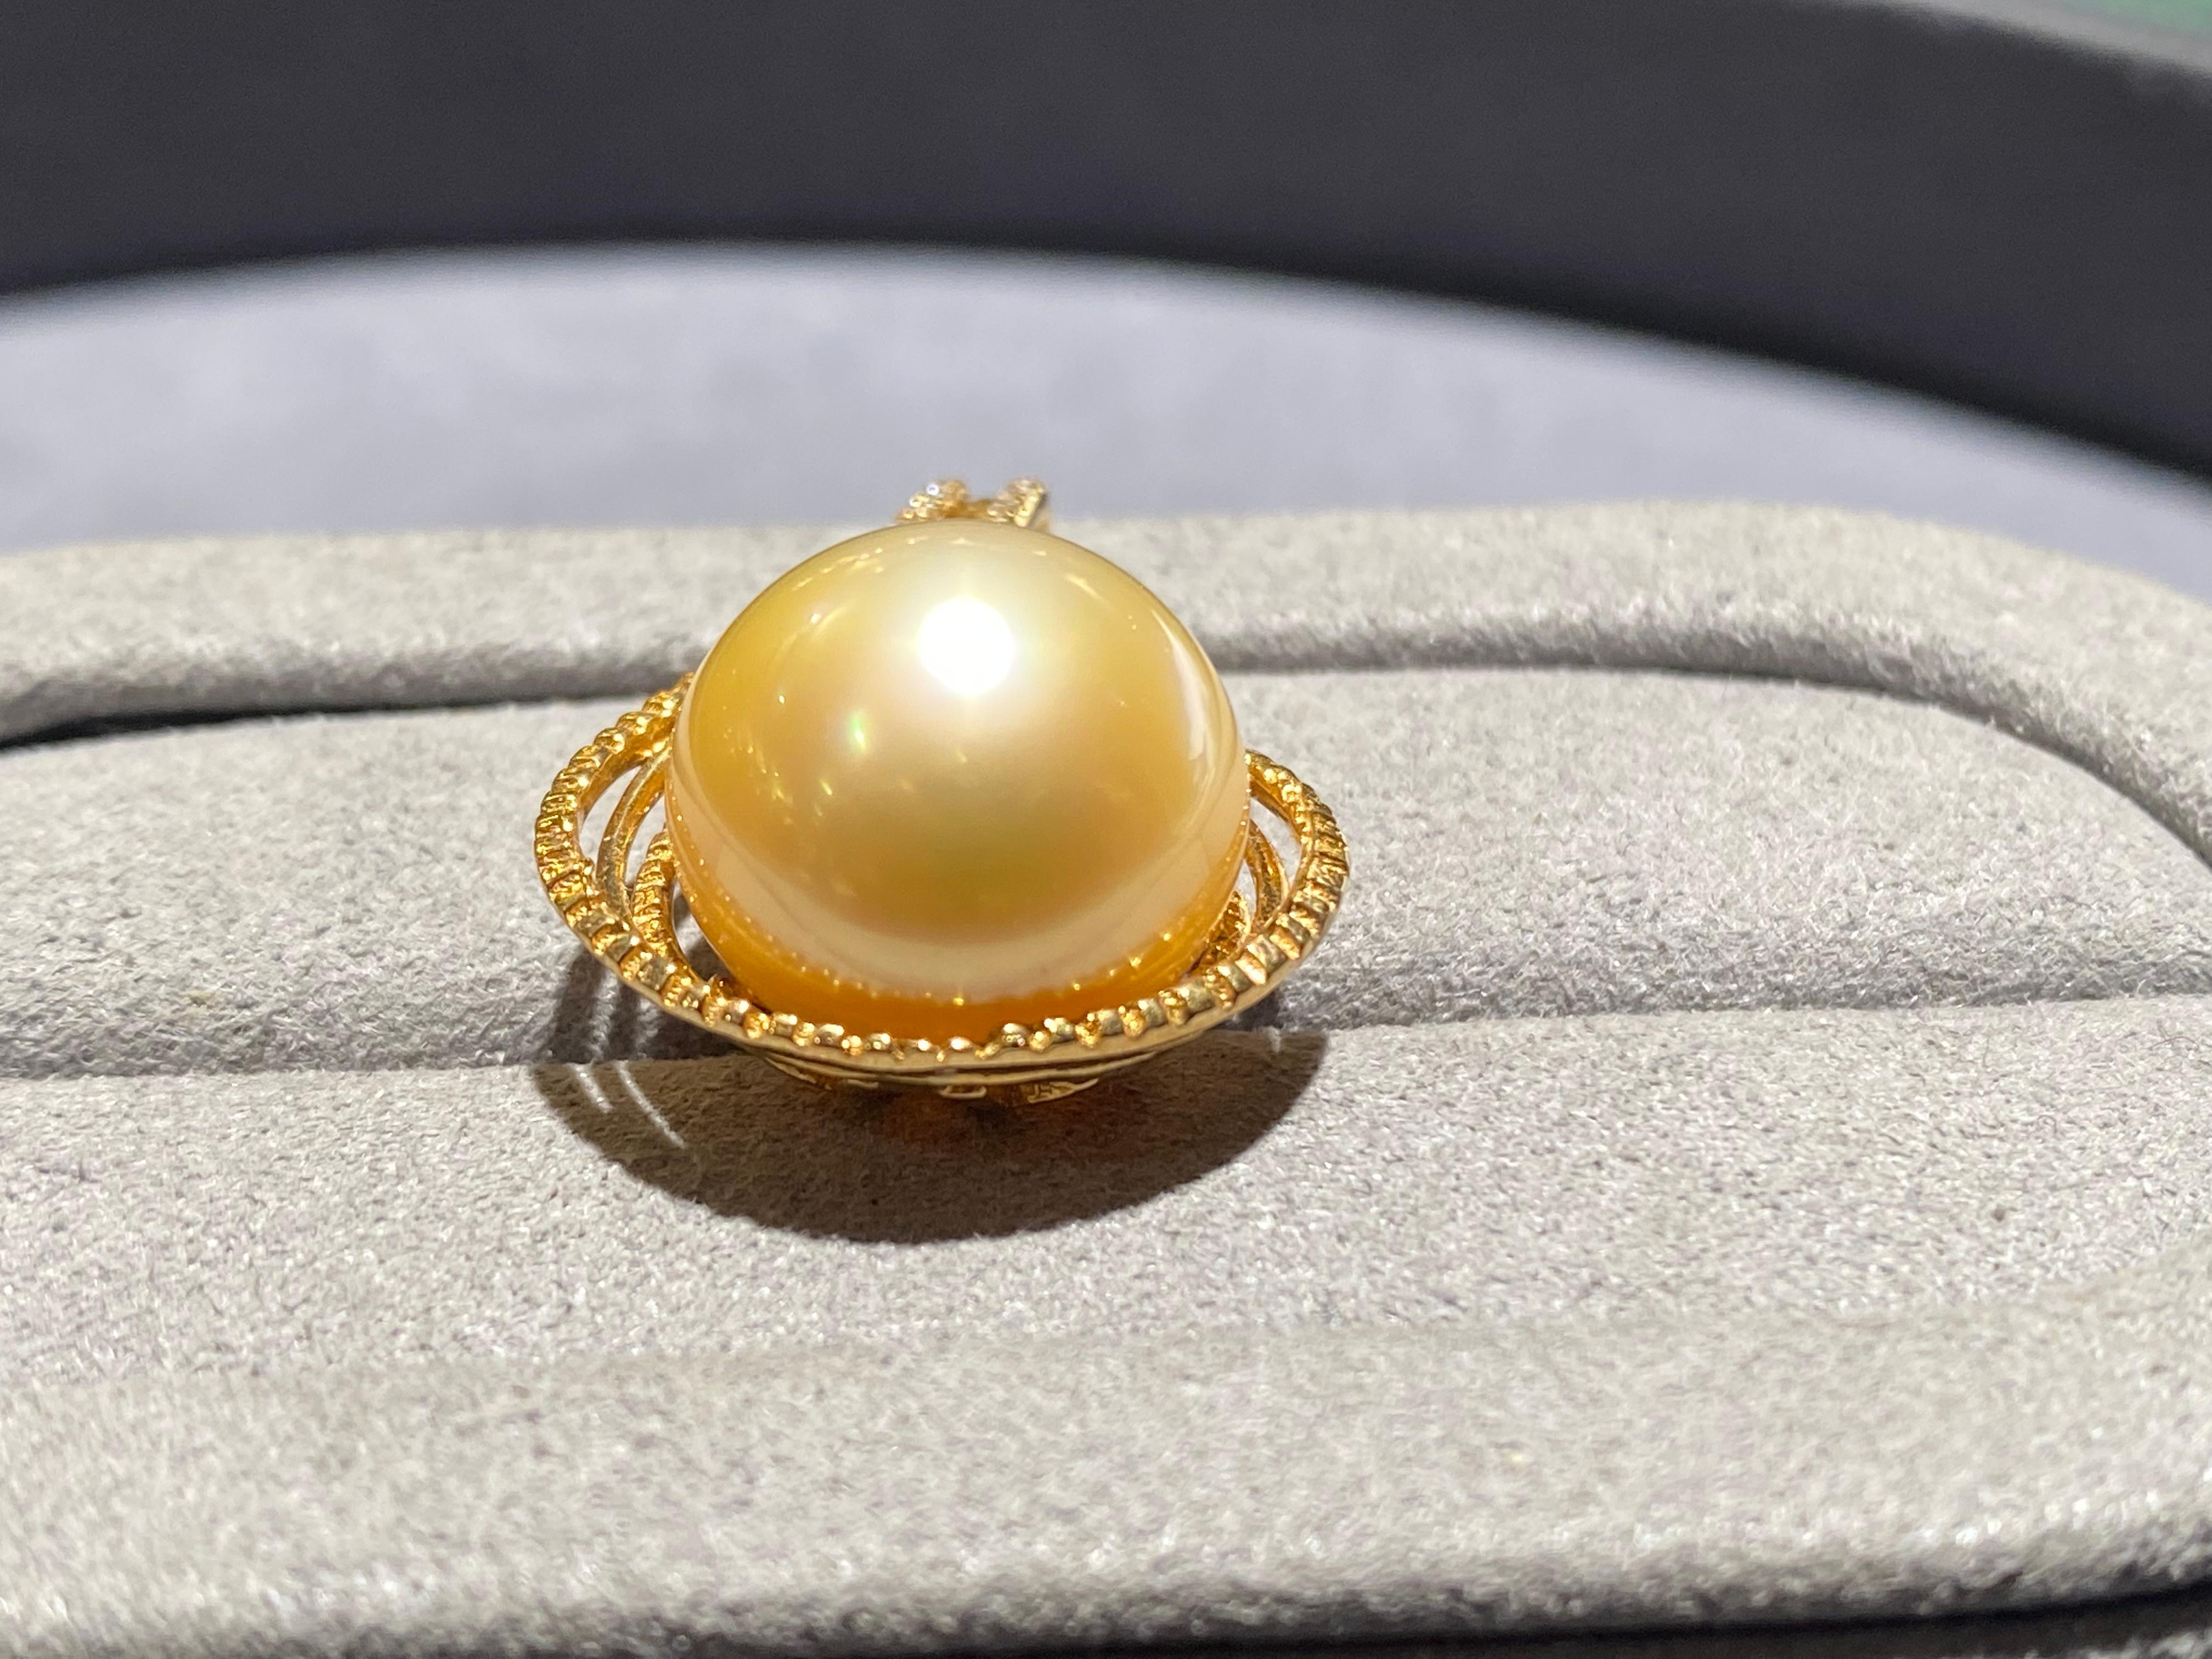 A round 13.2 mm champagne colour south sea pearl in 18k yellow gold. It is a rain drop pendant with a heart-shape ribbon near the bale end. It is a very simple pendant that is perfect for everyday wear. The colour of the pearl is champagne with